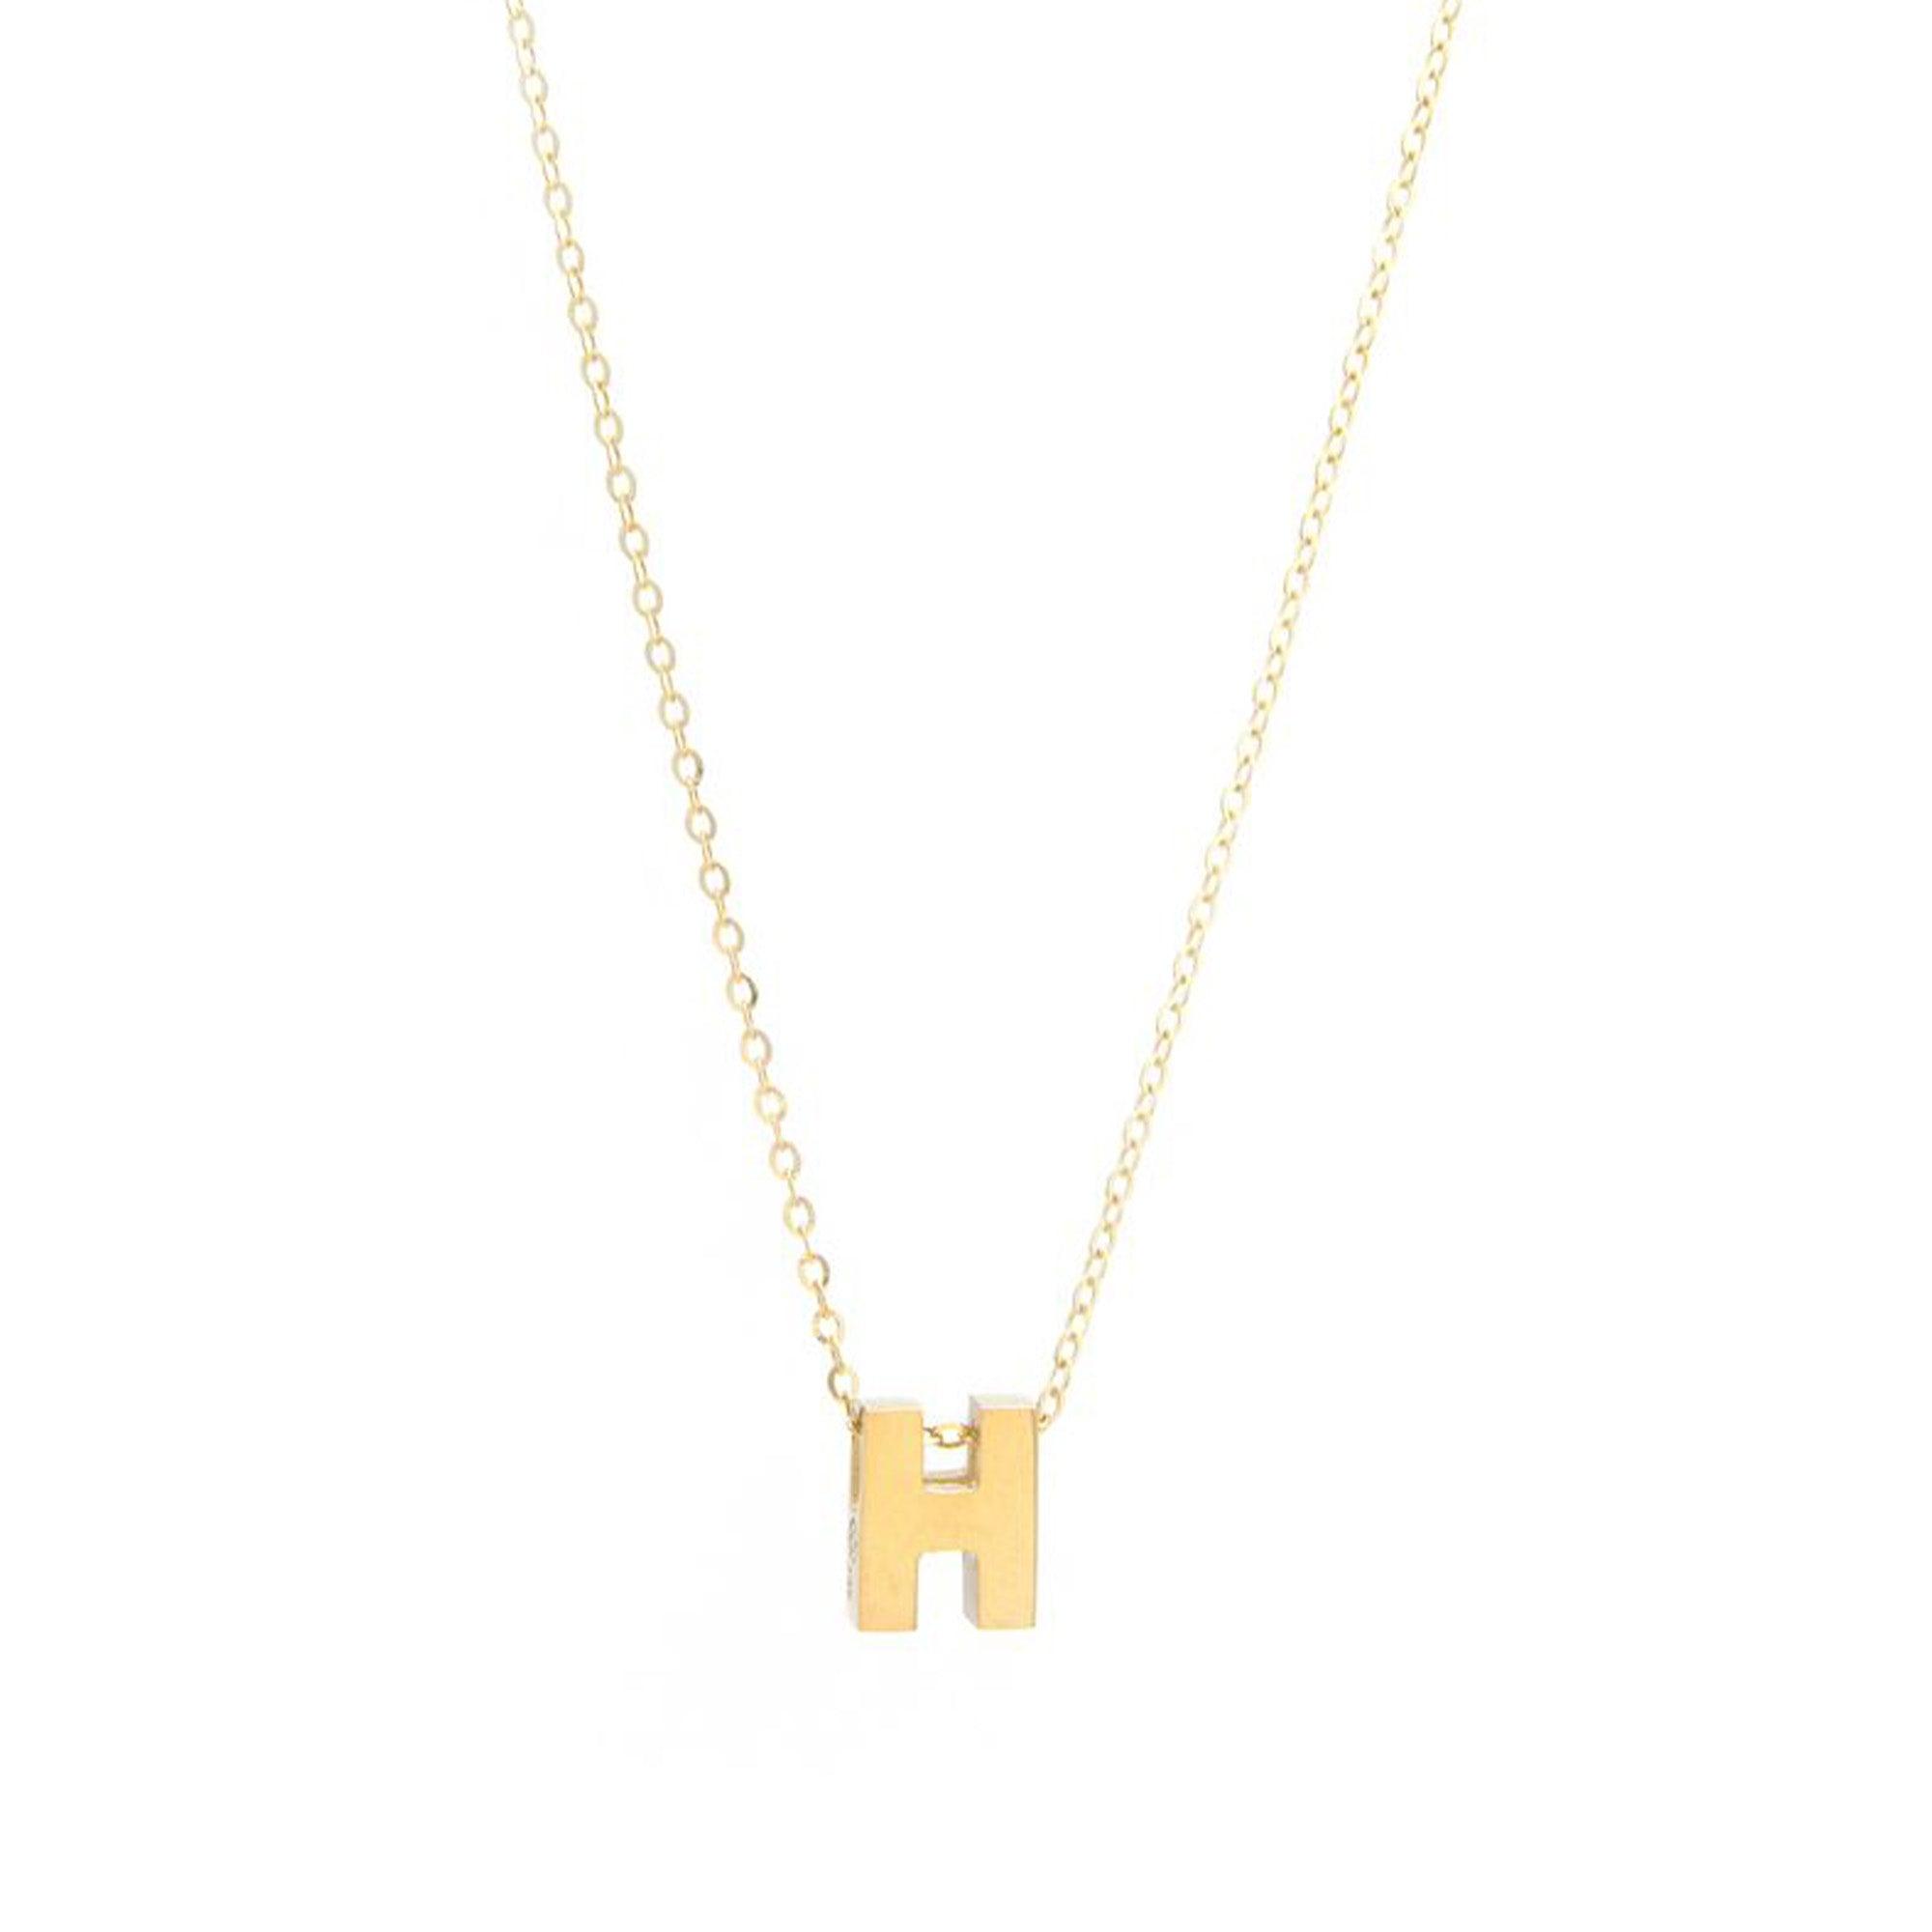 Personalised Initial Jewelry - Mens Initial Necklaces | Twistedpendant